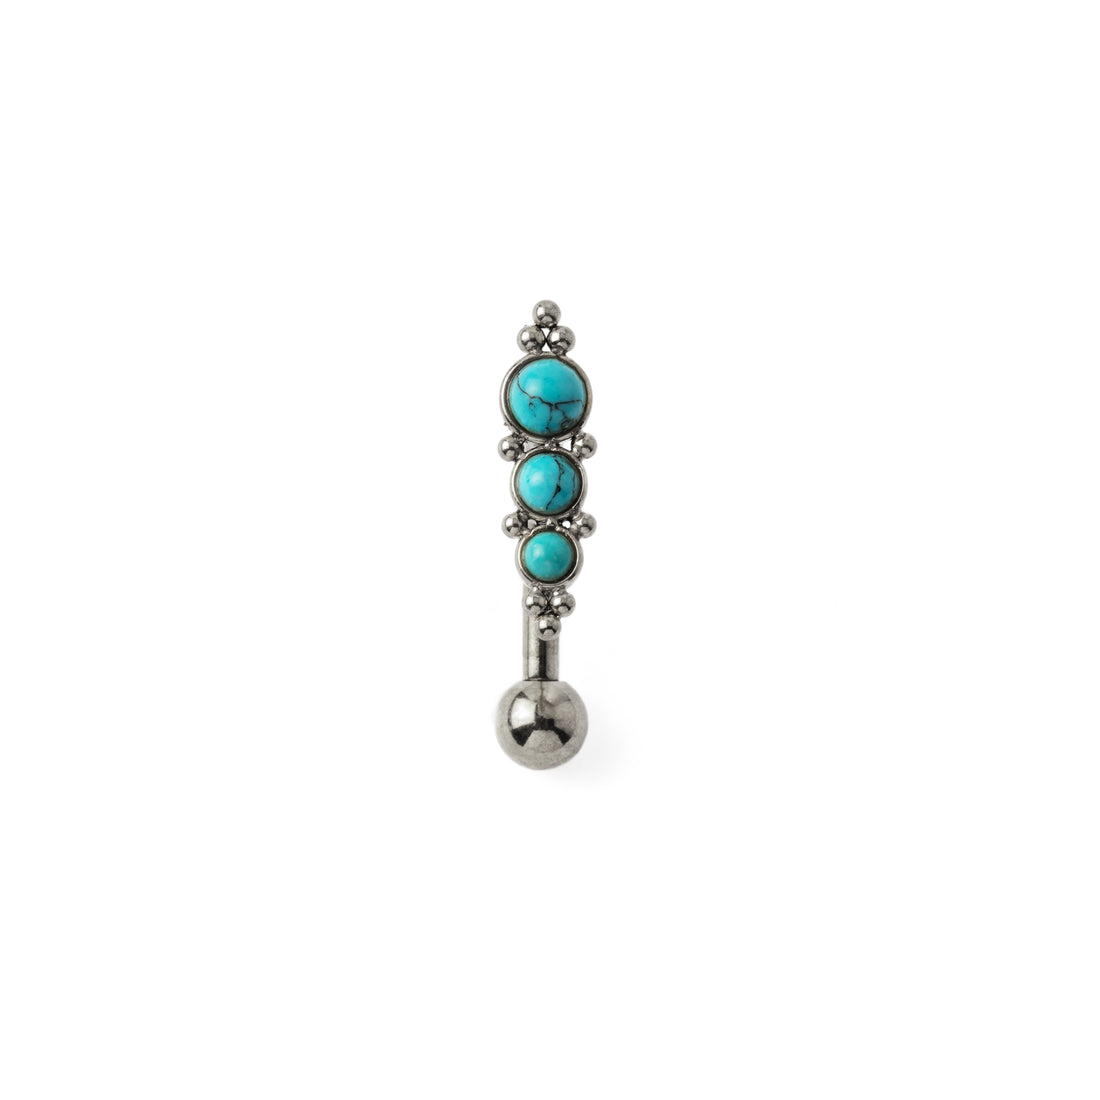 Floating Navel Piercing with Turquoise frontal view